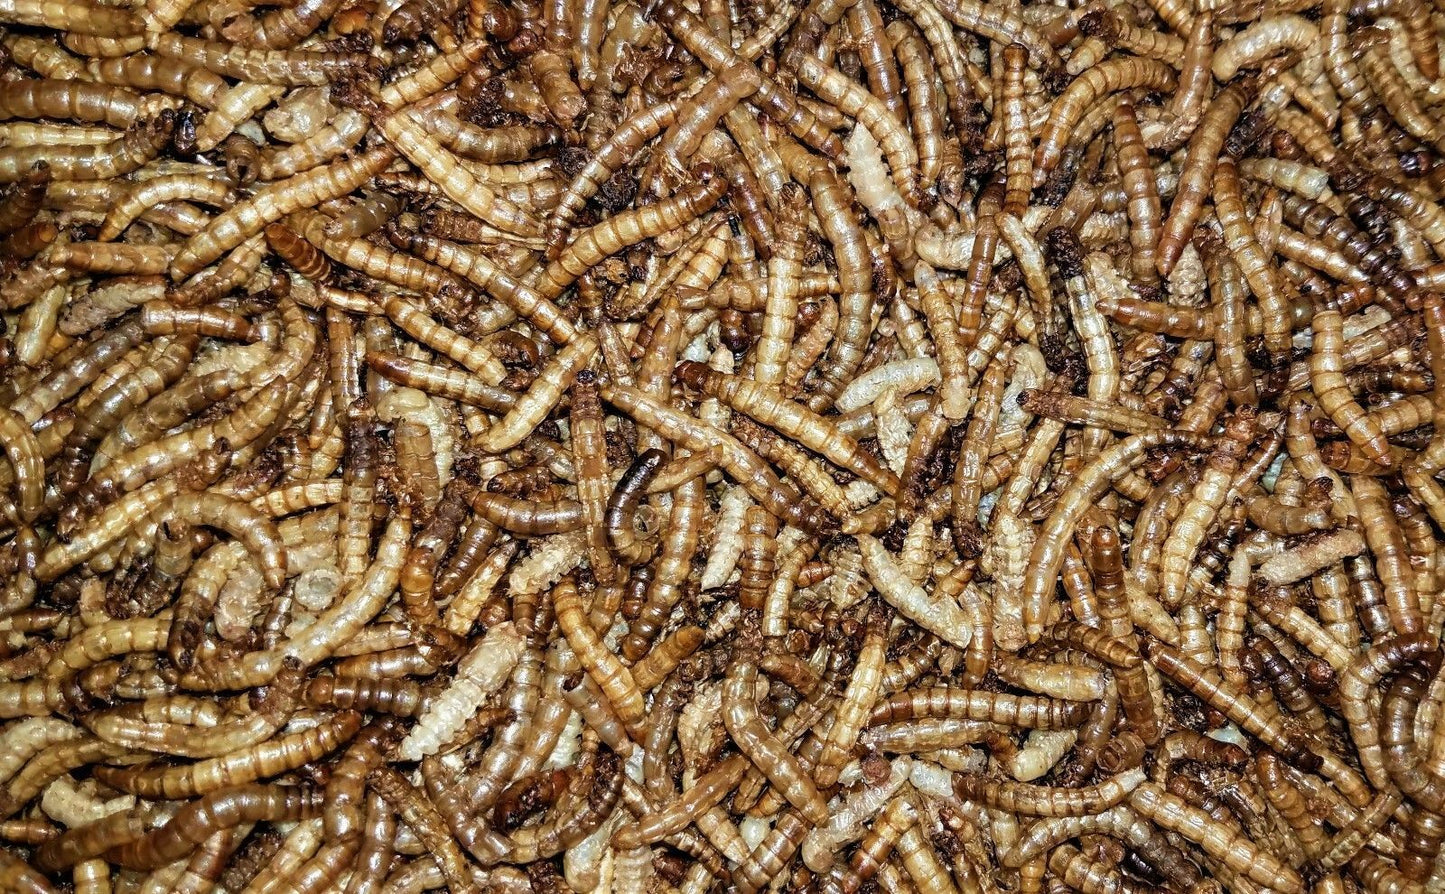 Dry Mealworms